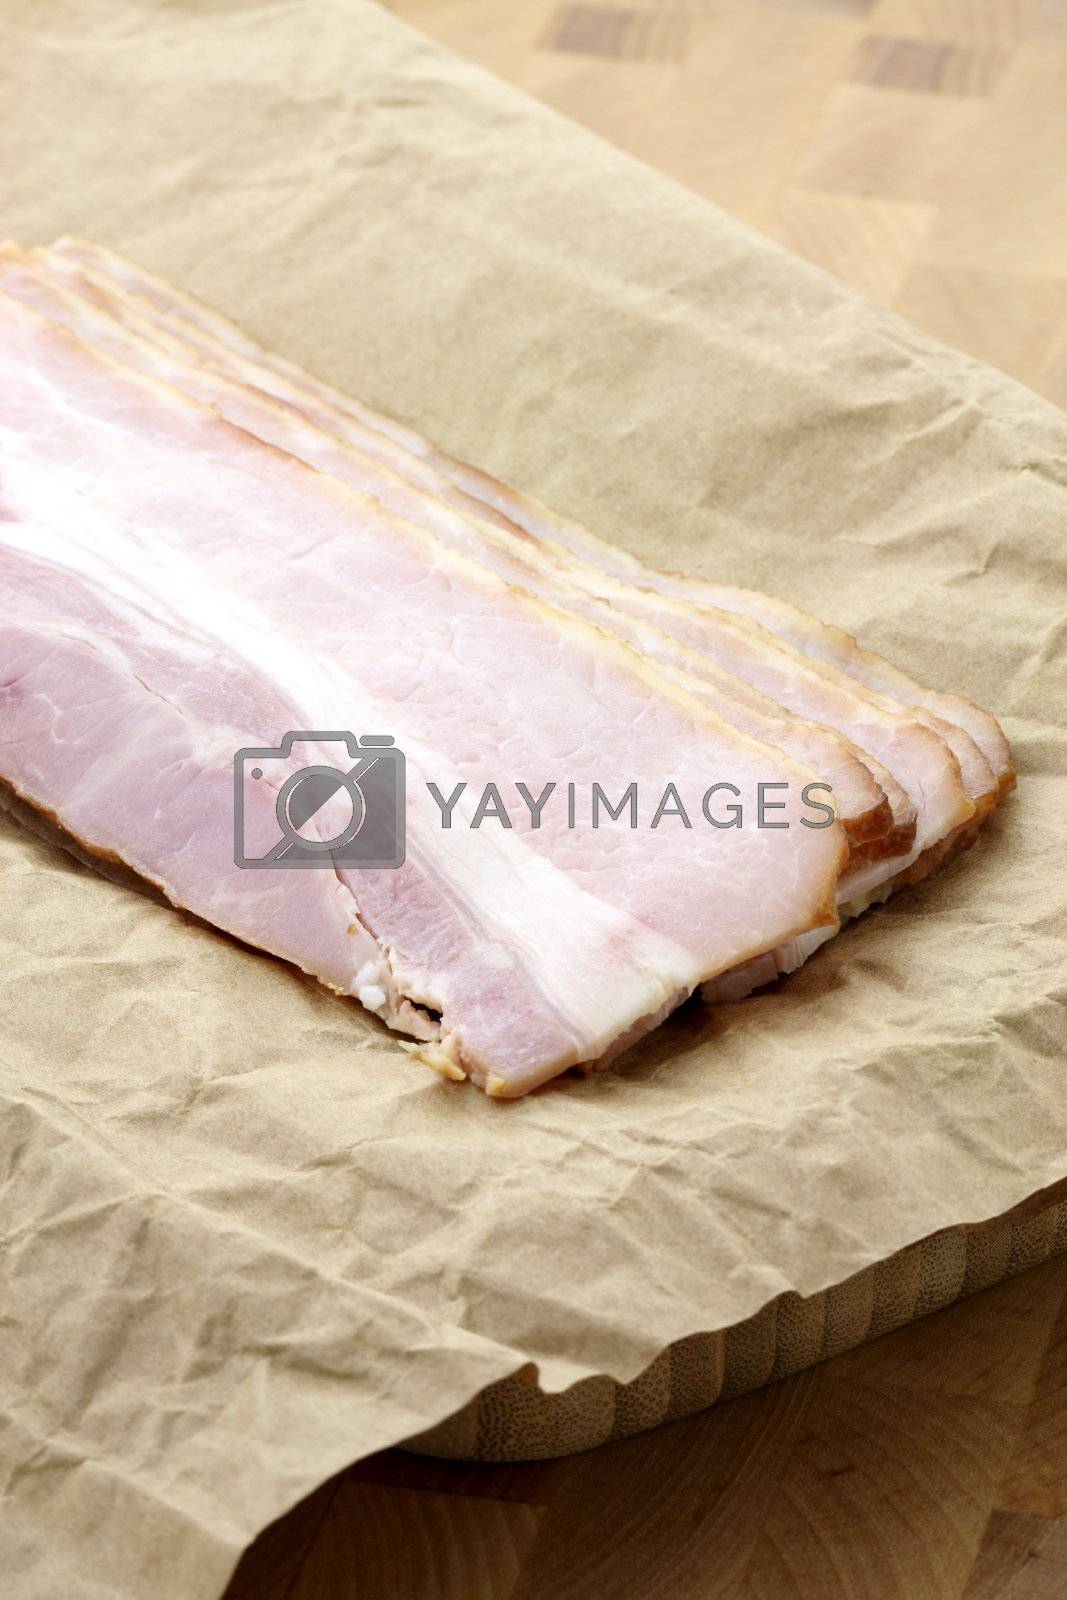 Royalty free image of cured delicious bacon by tacar